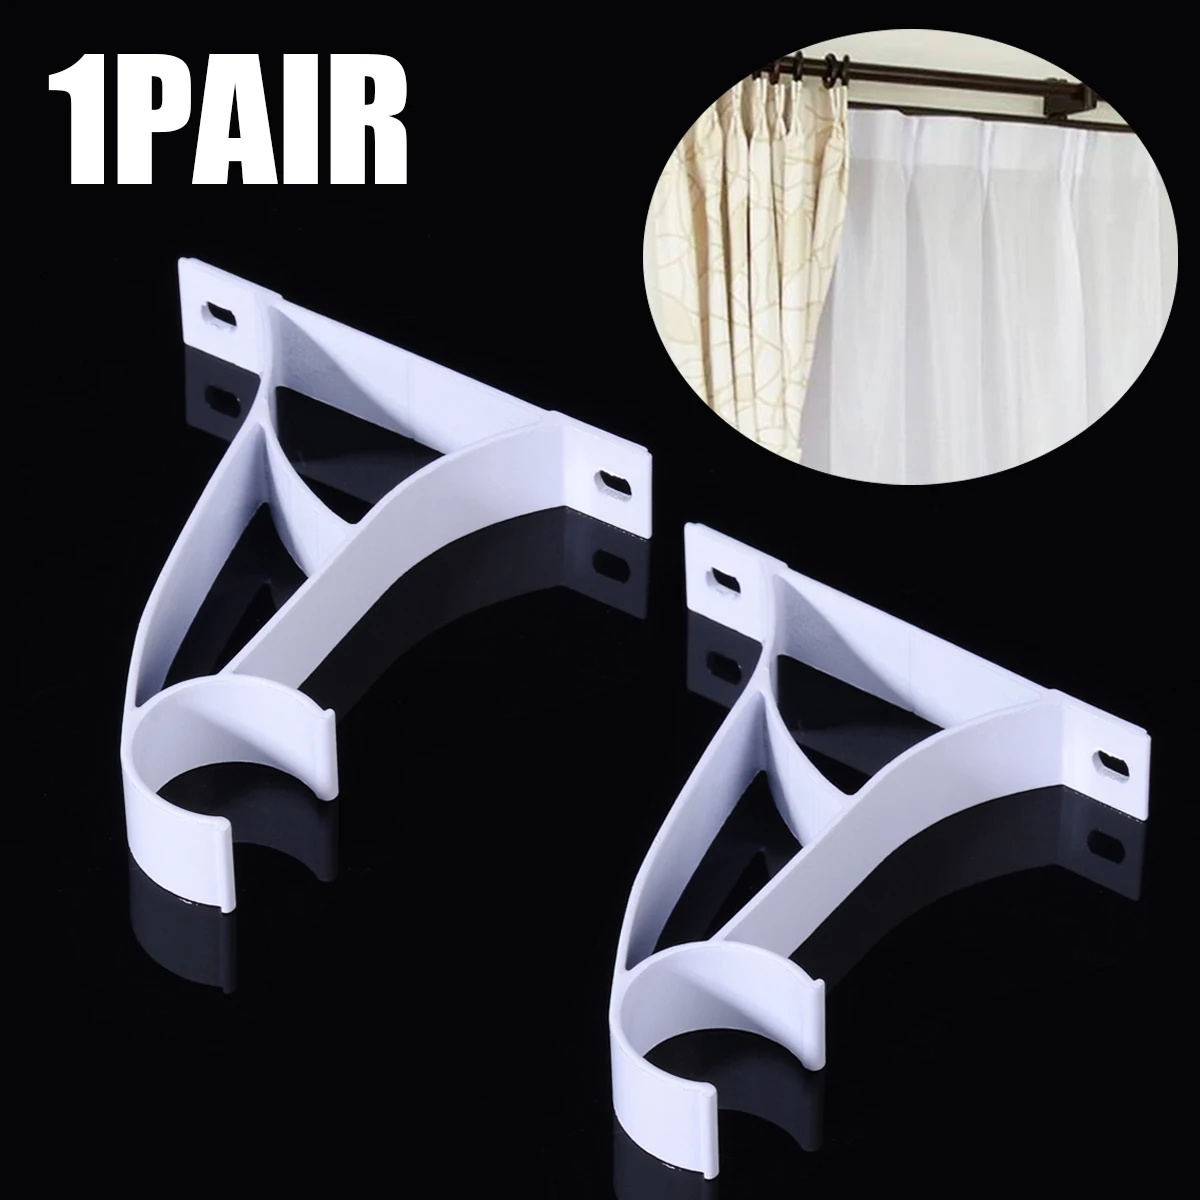 1 Pair Hang Curtain Rod Holders Tap Right Into Window Frame Curtain Rod Bracket 